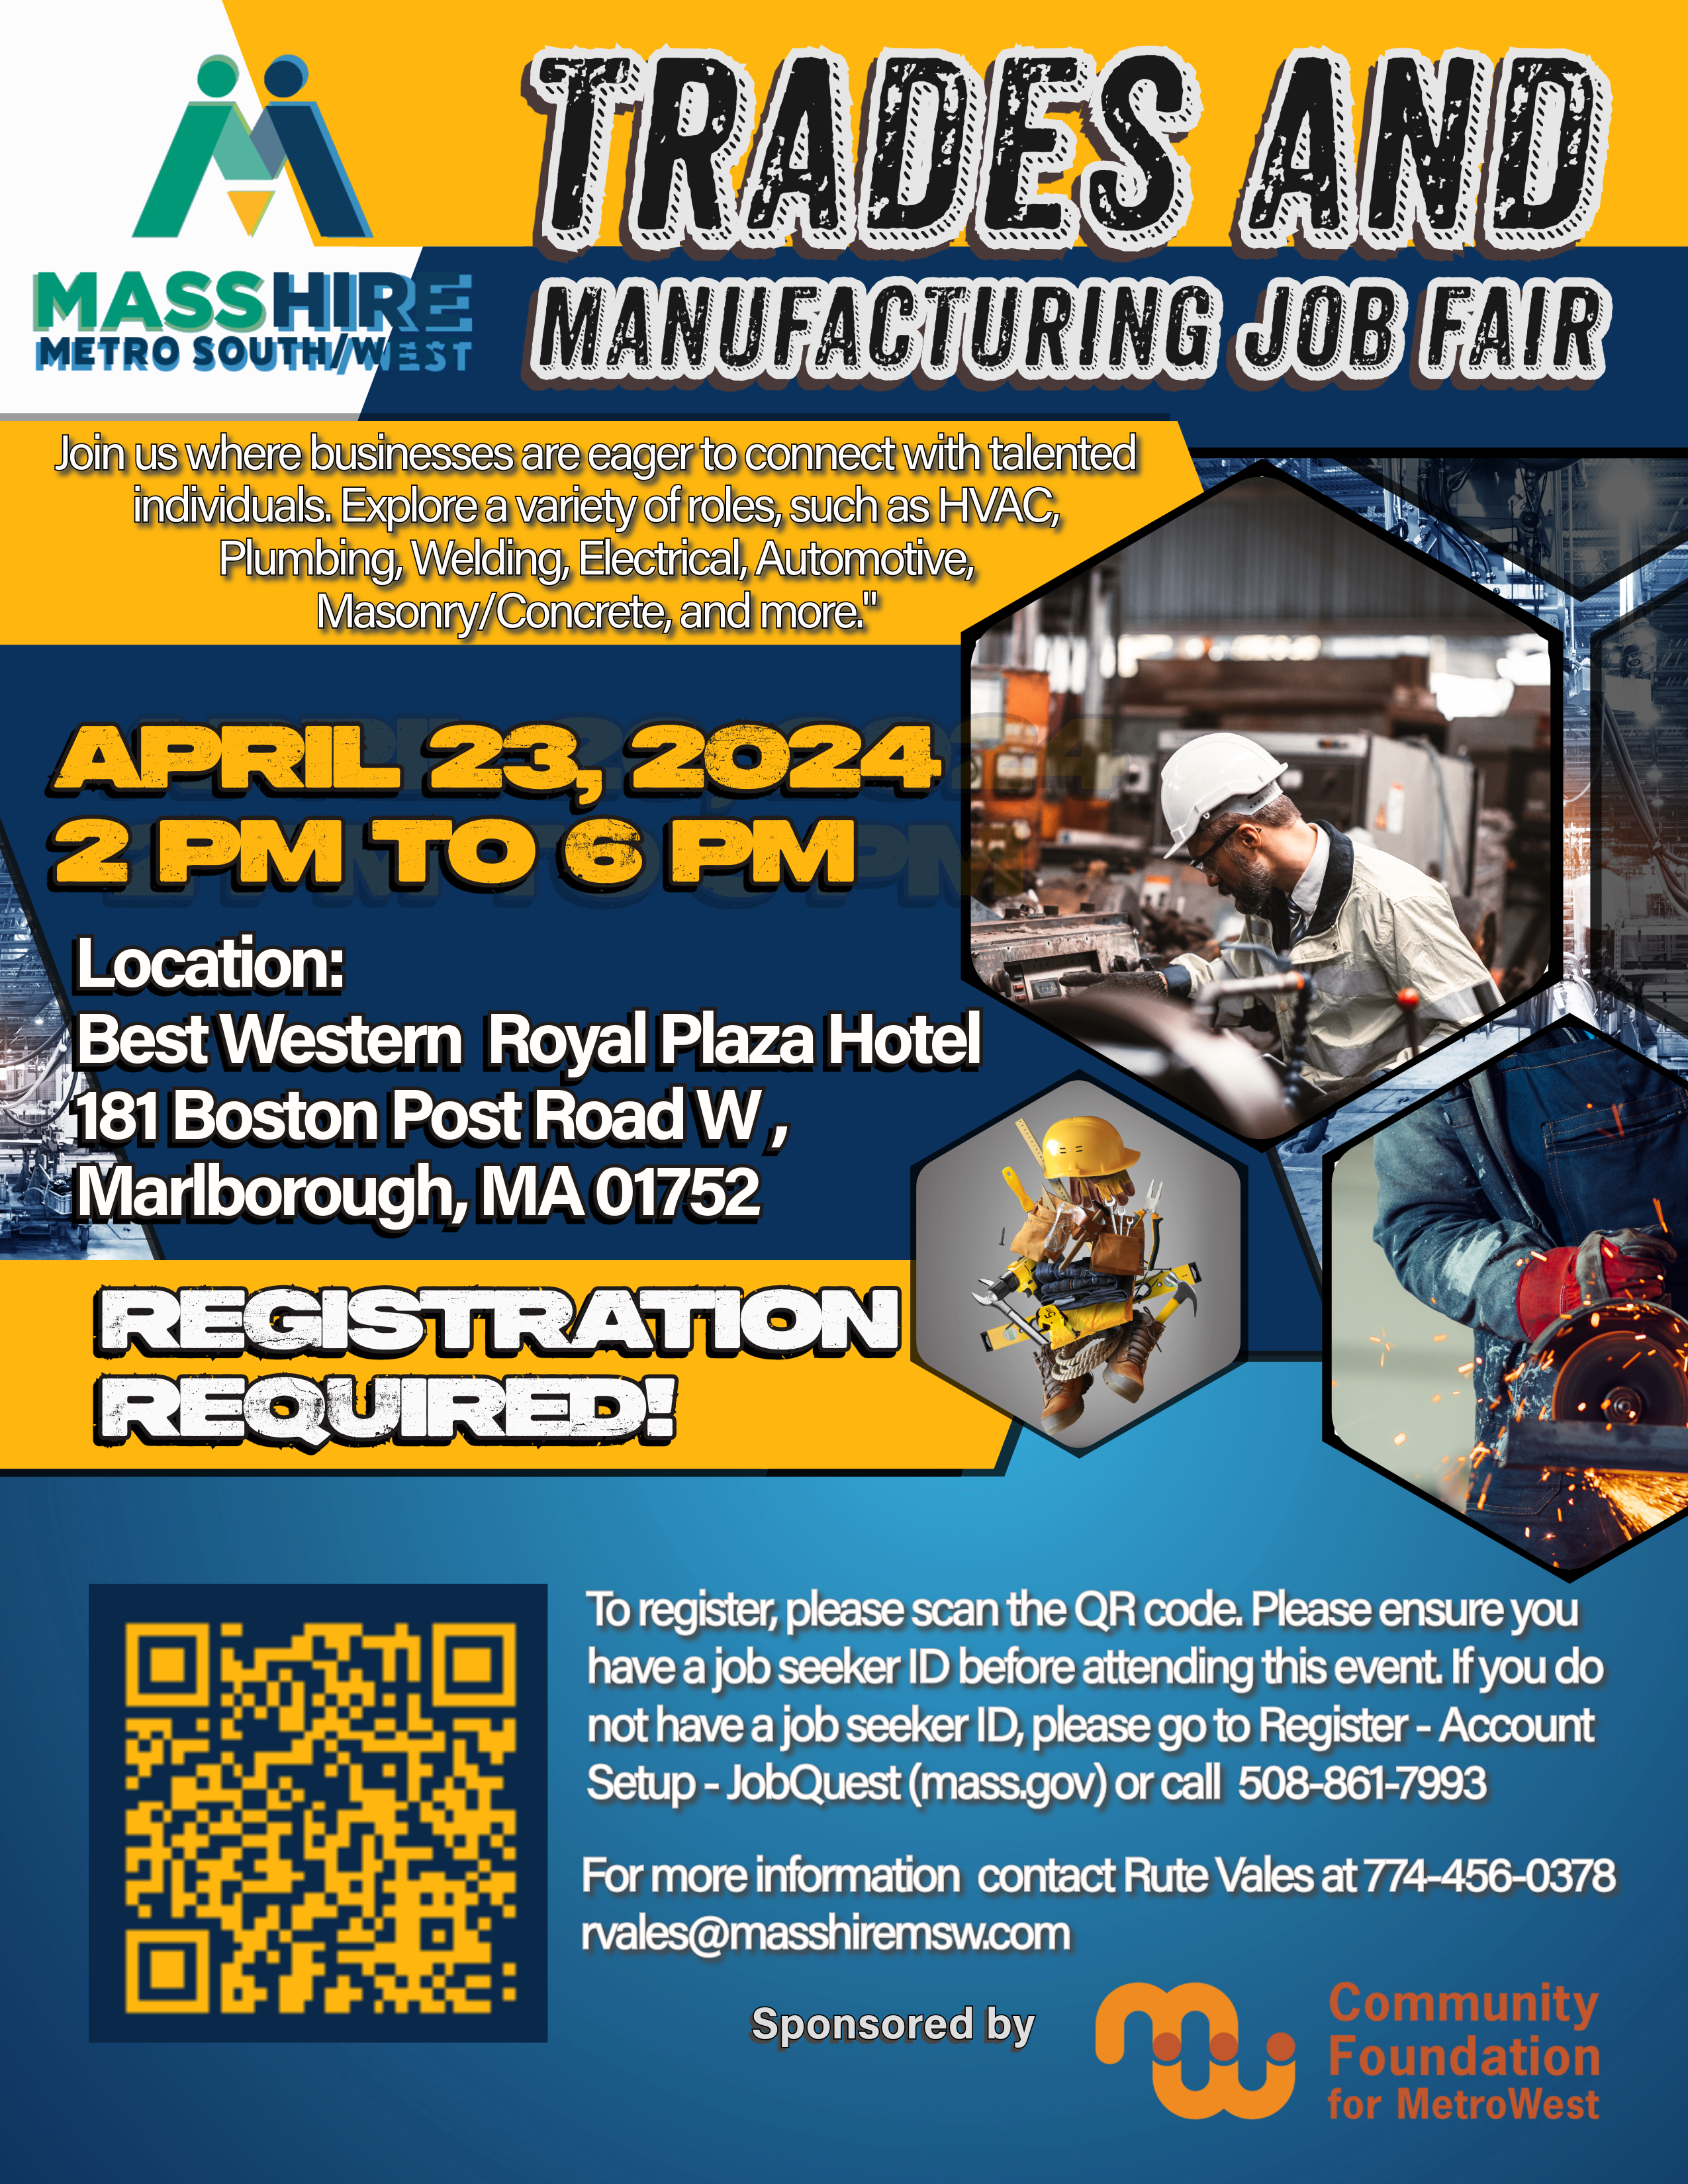 This is a flyer for the Trades and Manufacturing Career Fair being held on April 23, 2024 at the Marlborough Best Western Royal Plaza.